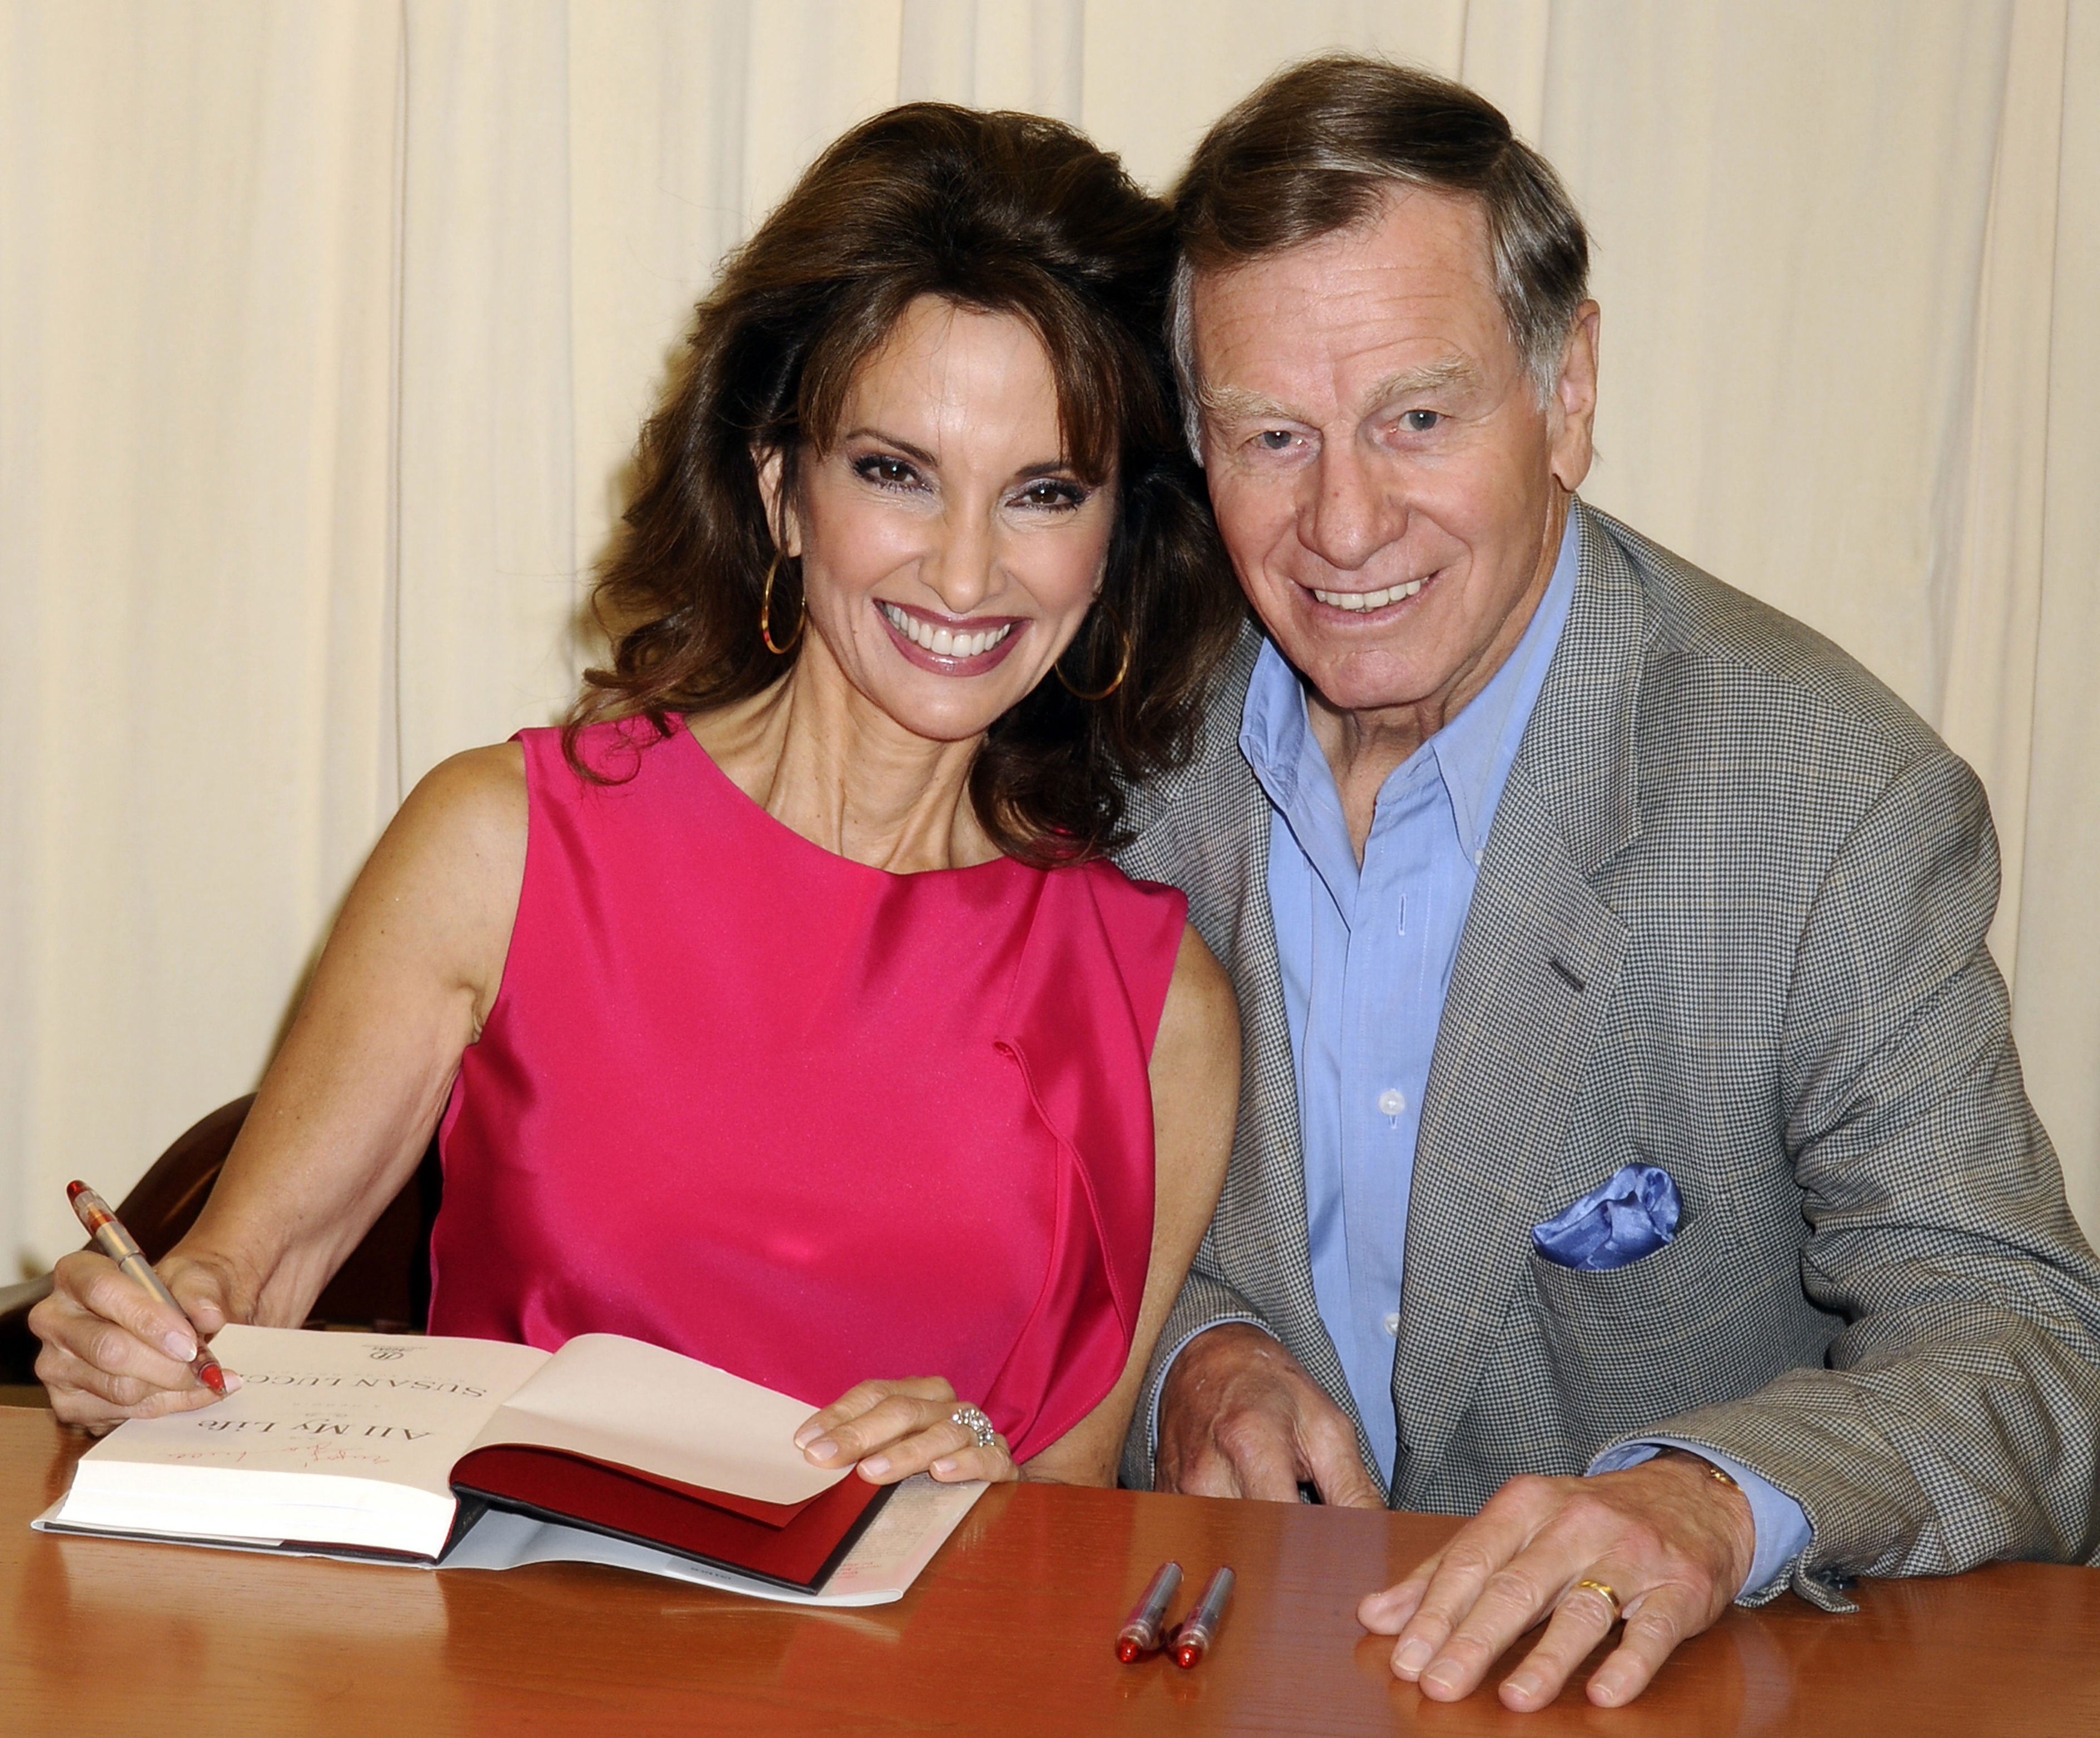 <p><span>Soap opera icon Susan Lucci lost her husband of 52 years, Helmut Huber, on March 28, 2022. He was 84. Nearly a year later, the "All My Children" actress opened up about her grief, telling "Good Day New York" that the Austrian TV producer had been a "very special big presence" and "very take-charge in a good way" as well as "caring, a caregiver, funny [and] smart. ... not to mention very handsome and [he had a] cute accent." When asked if she felt ready to date again, Susan made it clear she was not. "Everybody's different, and I just miss him and he's worth missing," she said. "He was really, really the love of my life."</span></p>